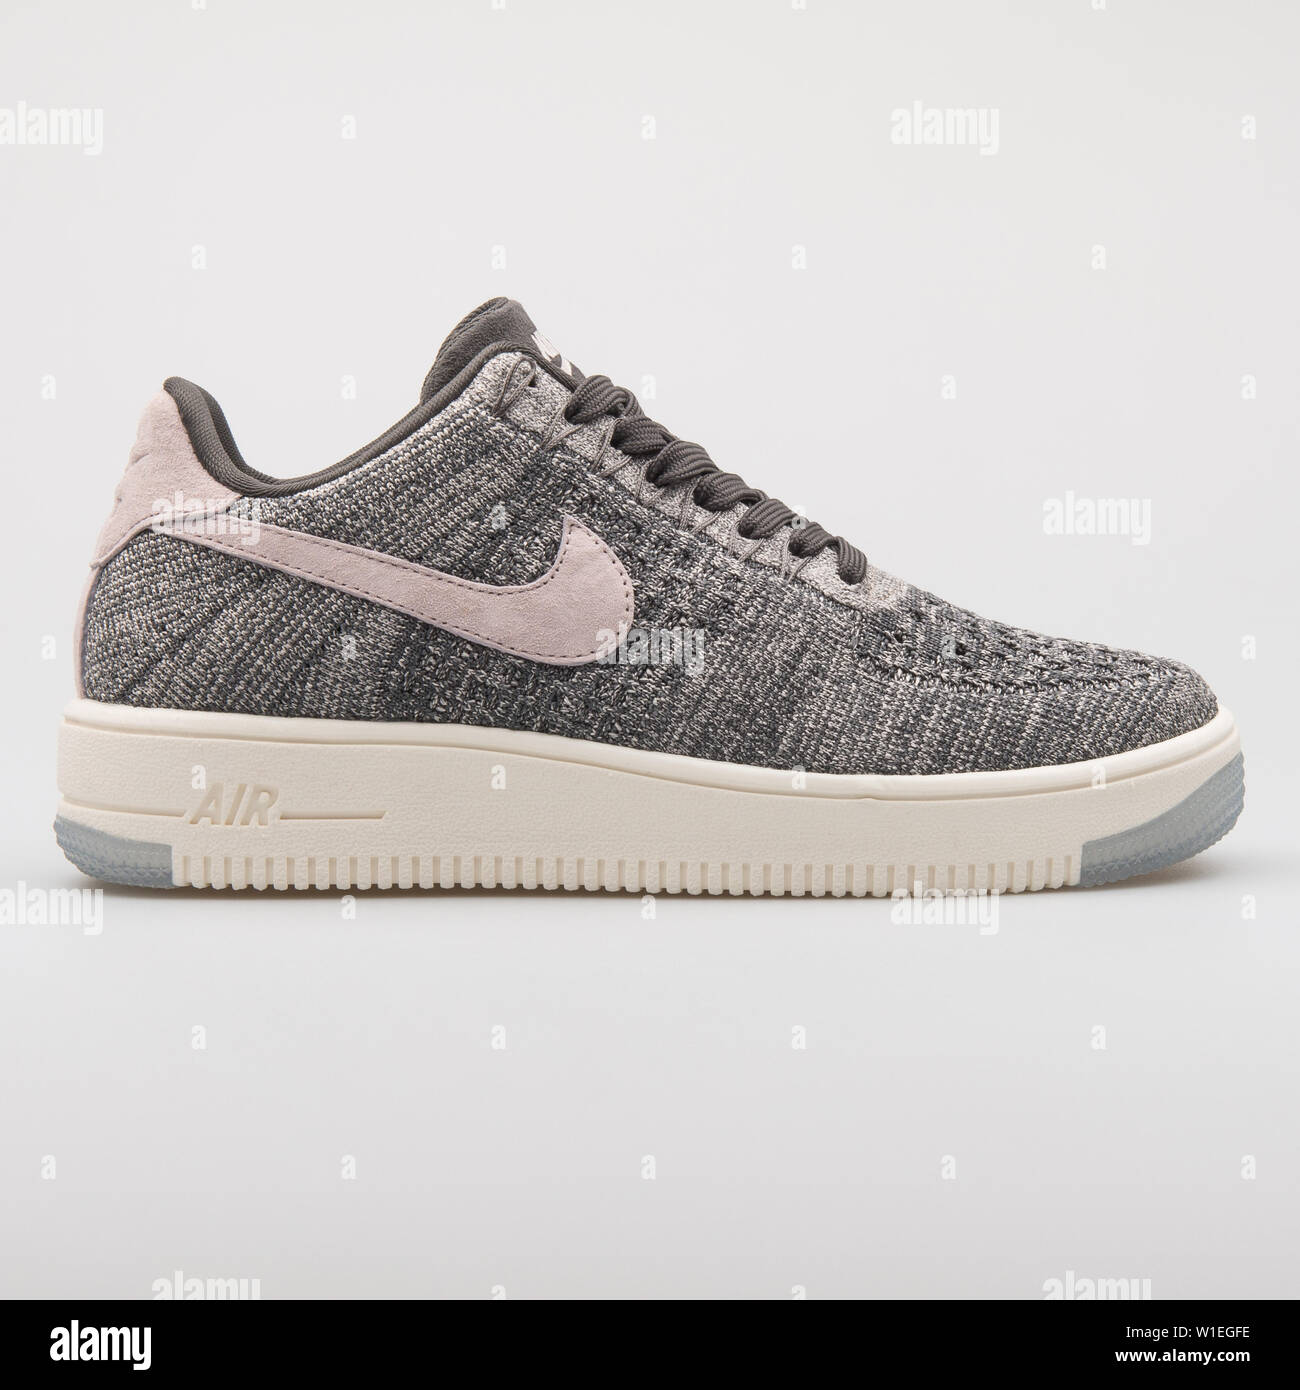 nike air force grey and pink